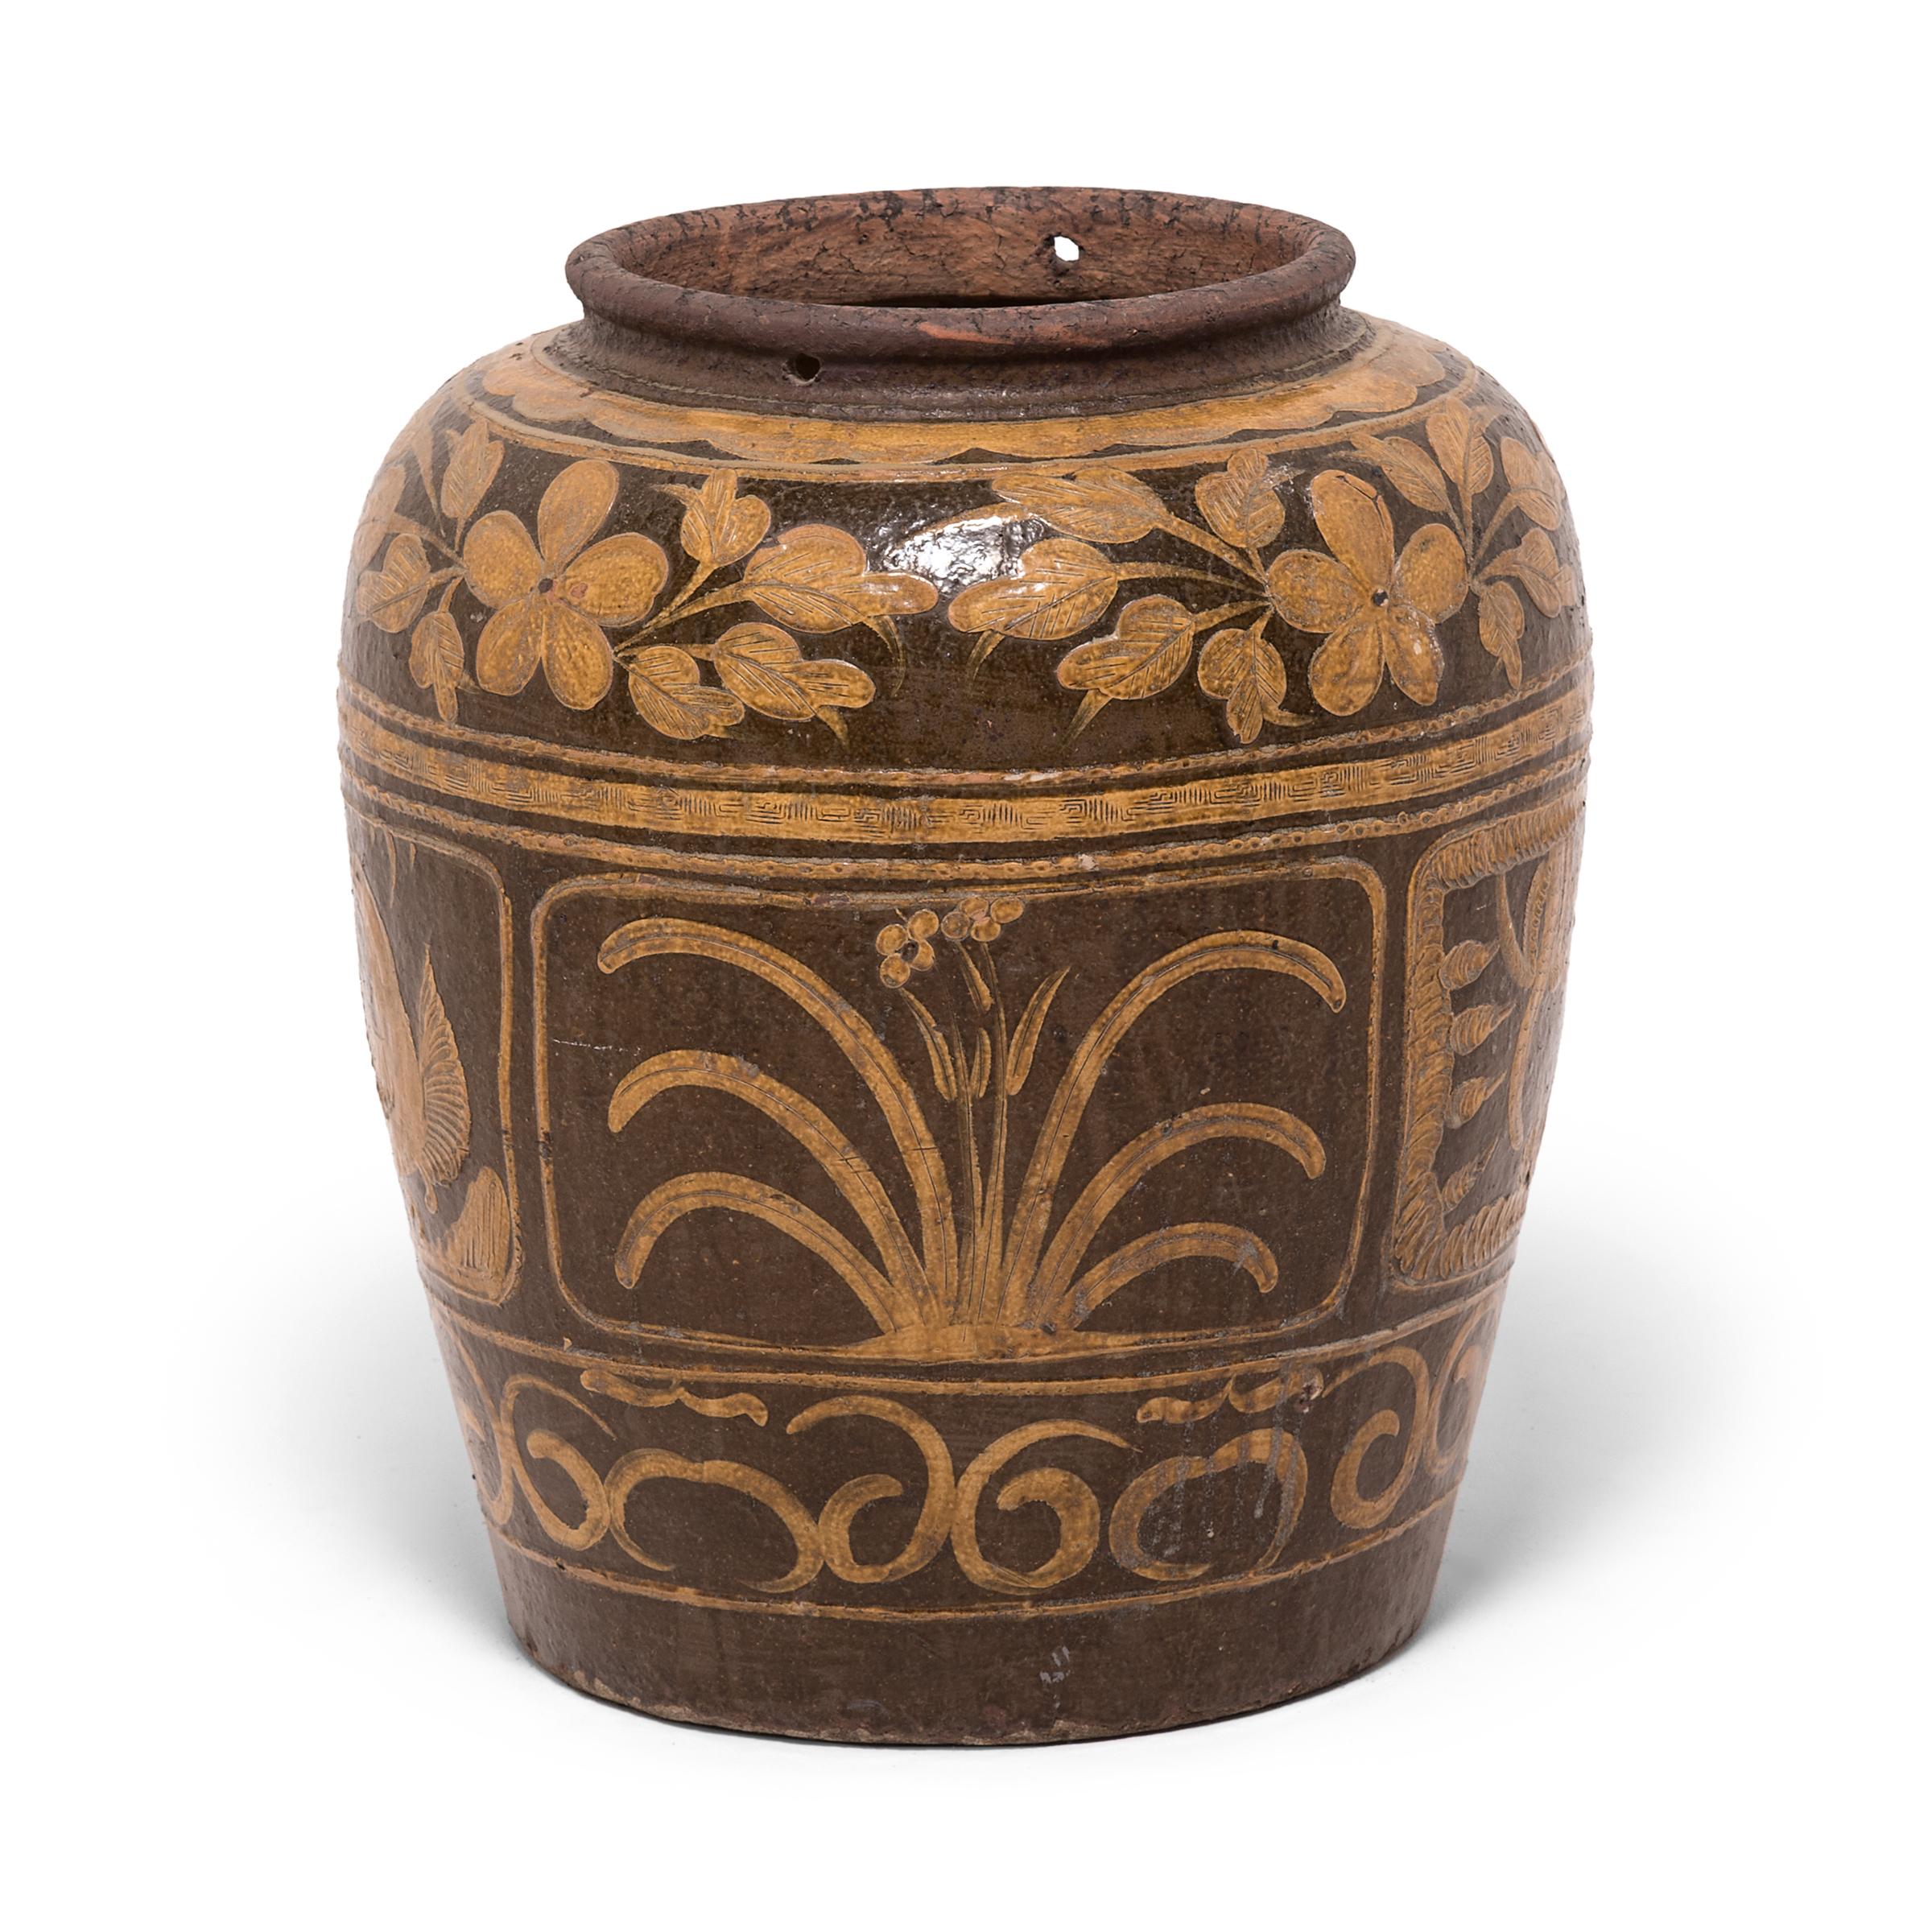 Unlike ceramics decorated with underglazing, this vase was painted after it was fired. This technique enabled the artist to build up areas and experiment with texture, visible in the stamped pattern along the painted bands and in the embossing of